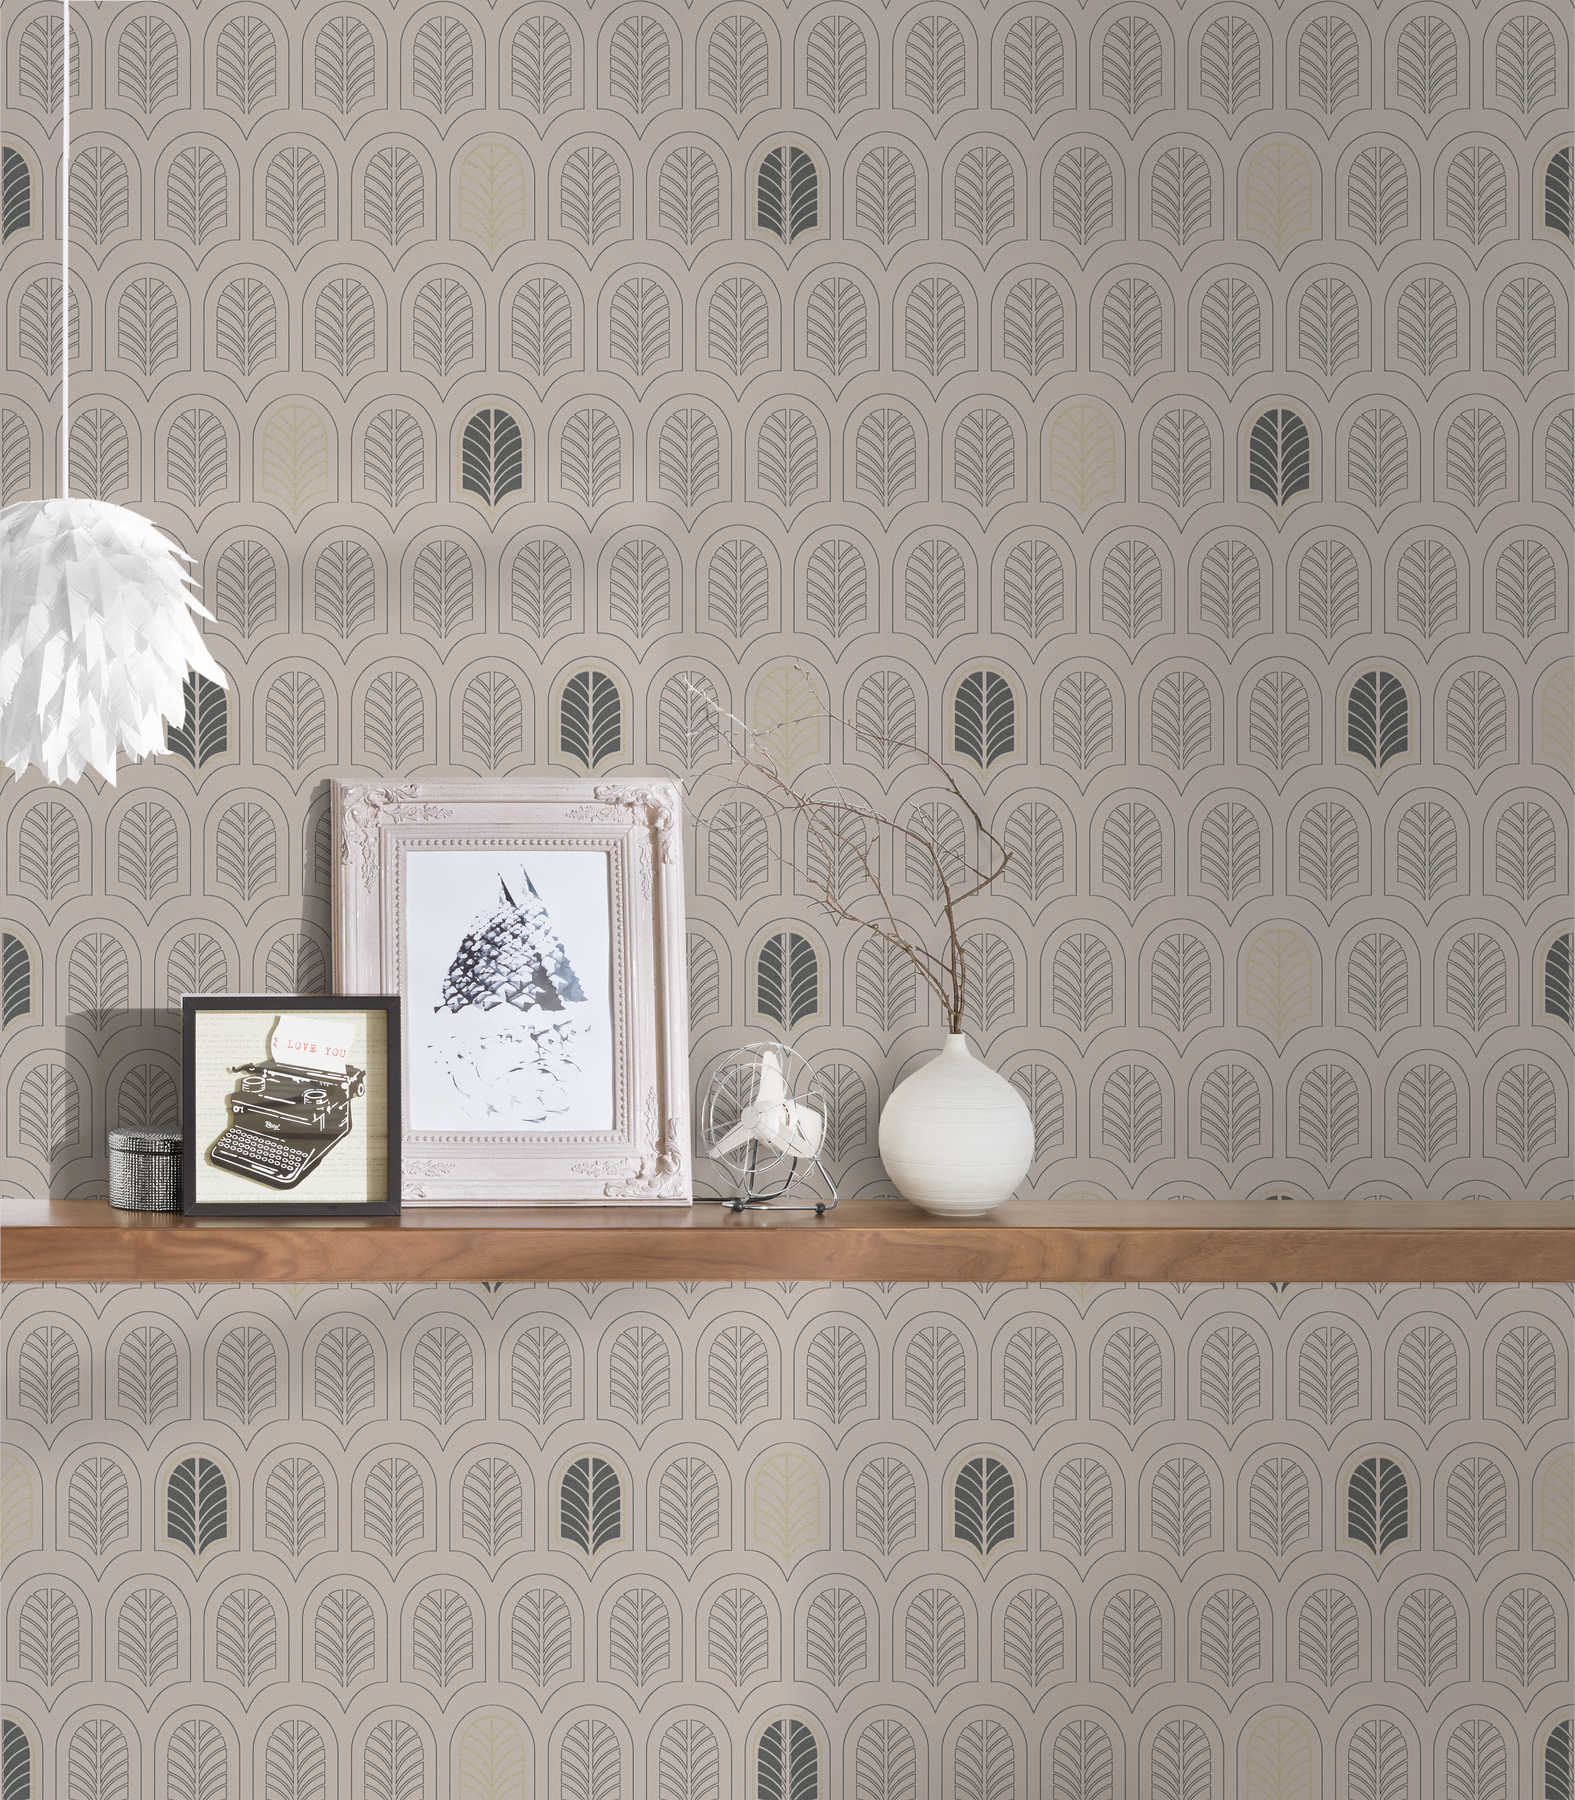             Art Deco wallpaper with metallic & glitter accents - taupe, anthracite, beige
        